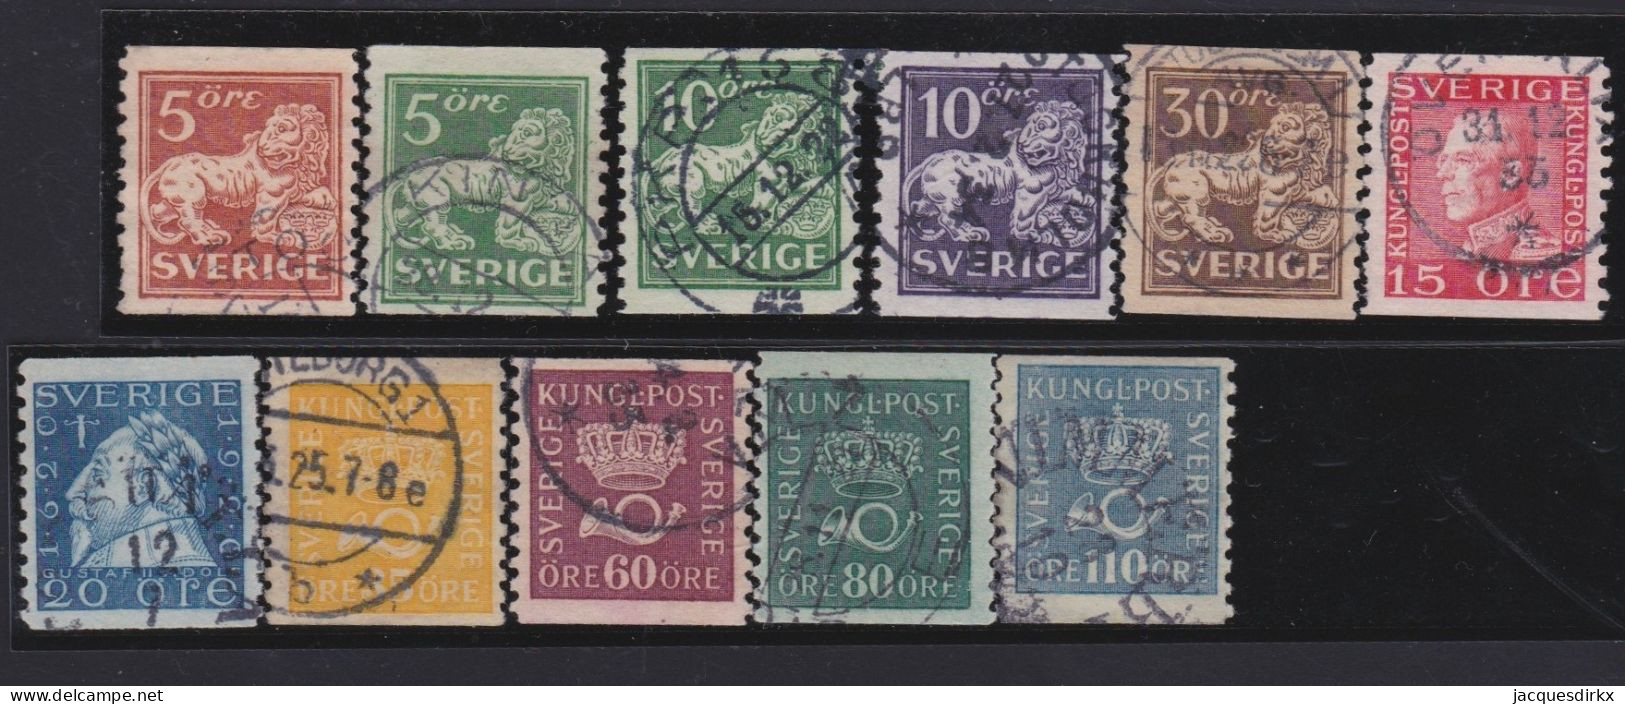 Sweden   .    Y&T   .  11  Stamps   .  Perf.  10 .     O   .     Cancelled - Used Stamps